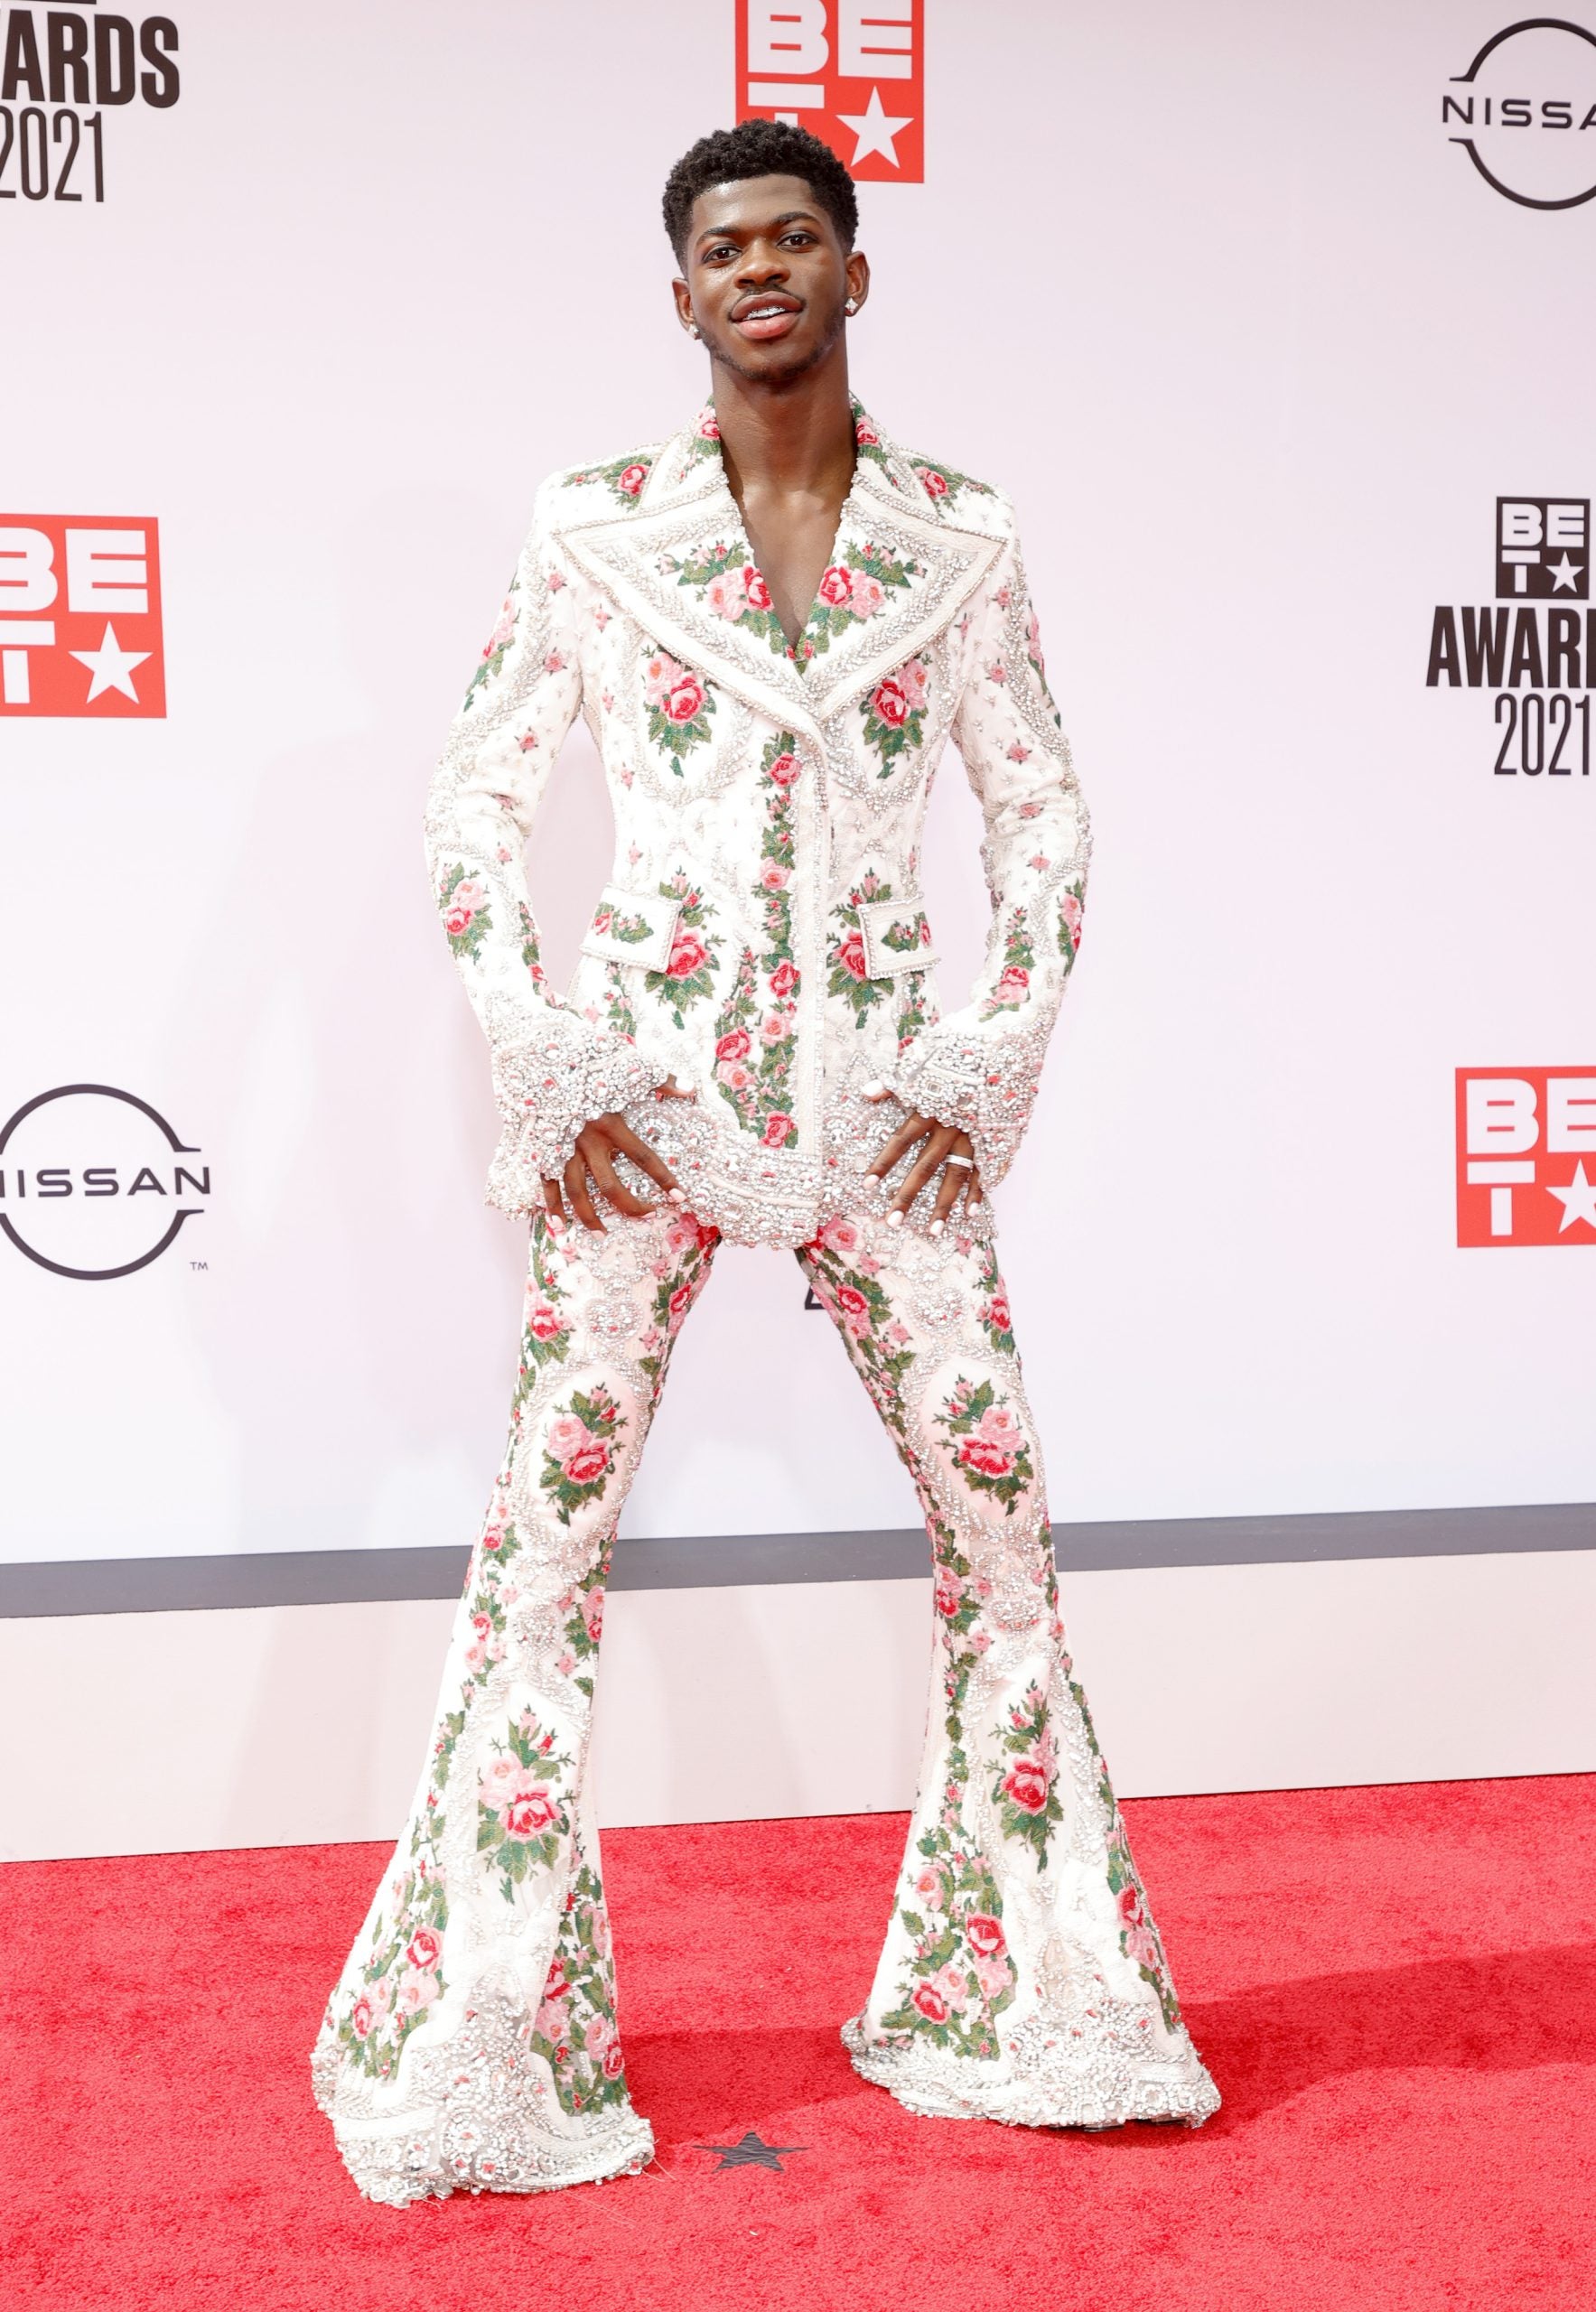 Our Favorite BET Awards Looks From The Past | Essence